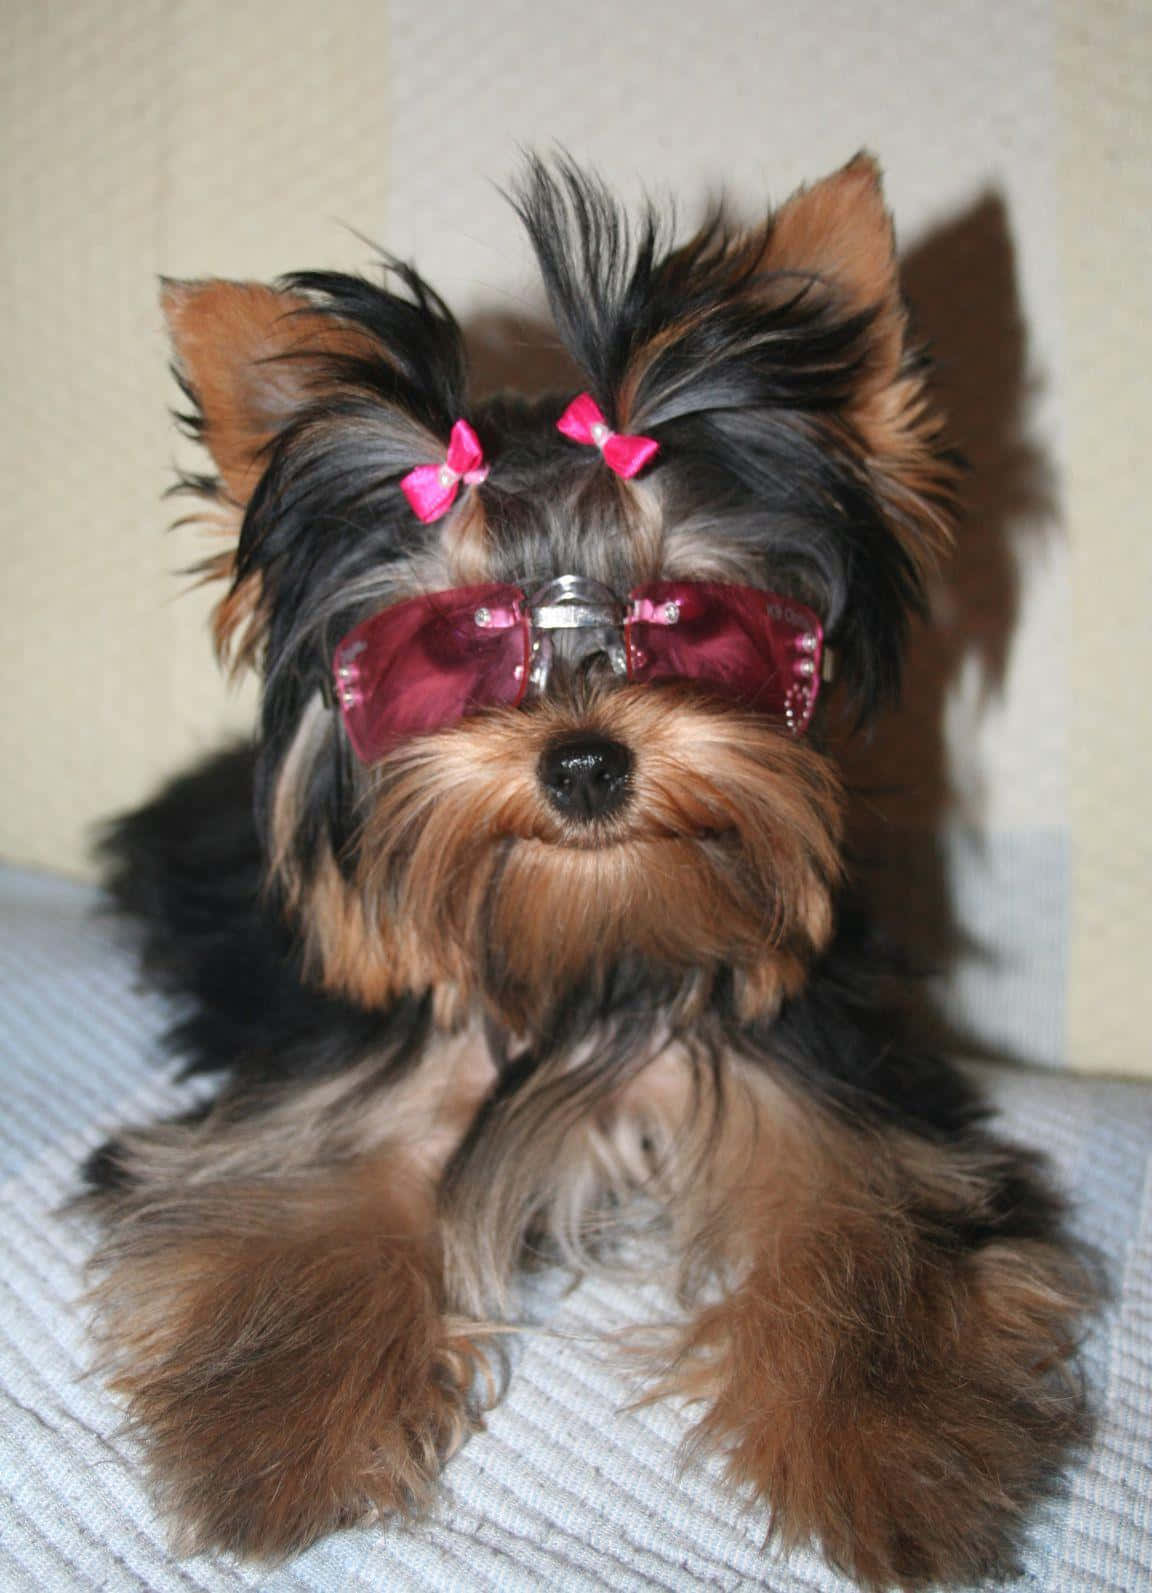 This adorable Yorkie pup just loves to play!